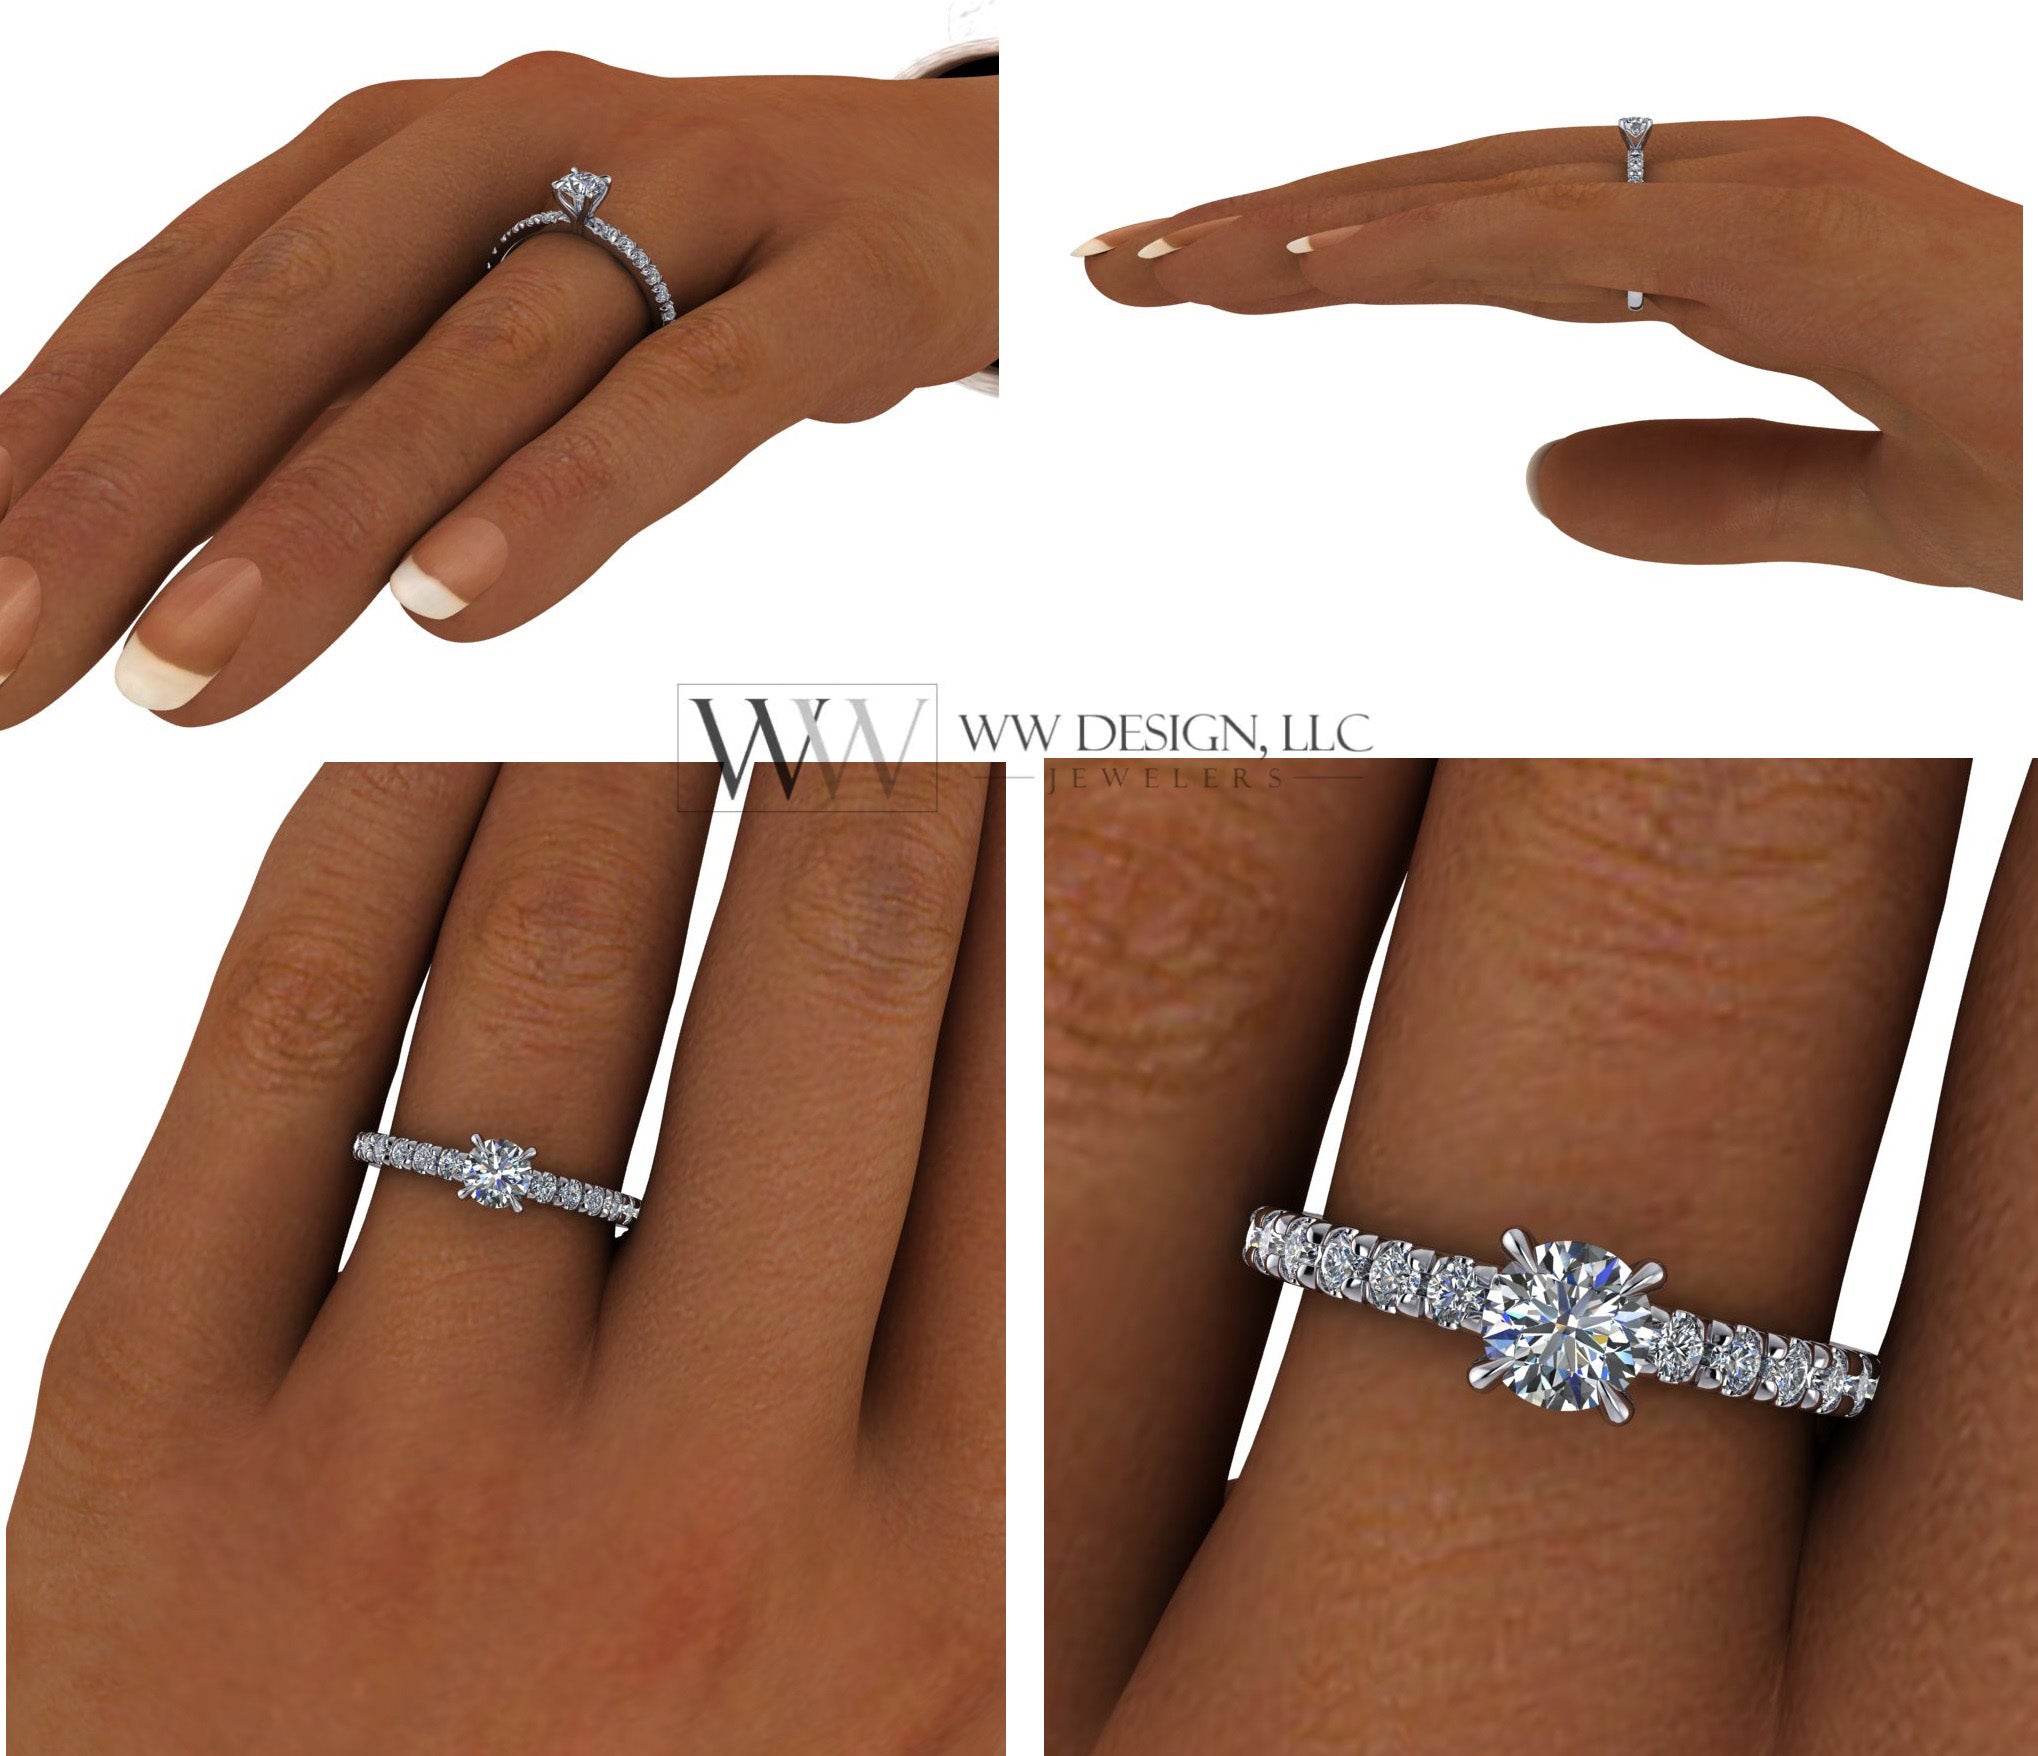 DIAMOND Engagement Ring Genuine F+ VS 0.25 ct (0.61 ctw) 4.1mm 14k Gold (Y, W, R) 18k Gold, Platinum Round w Pave Diamond Band Promise Ring